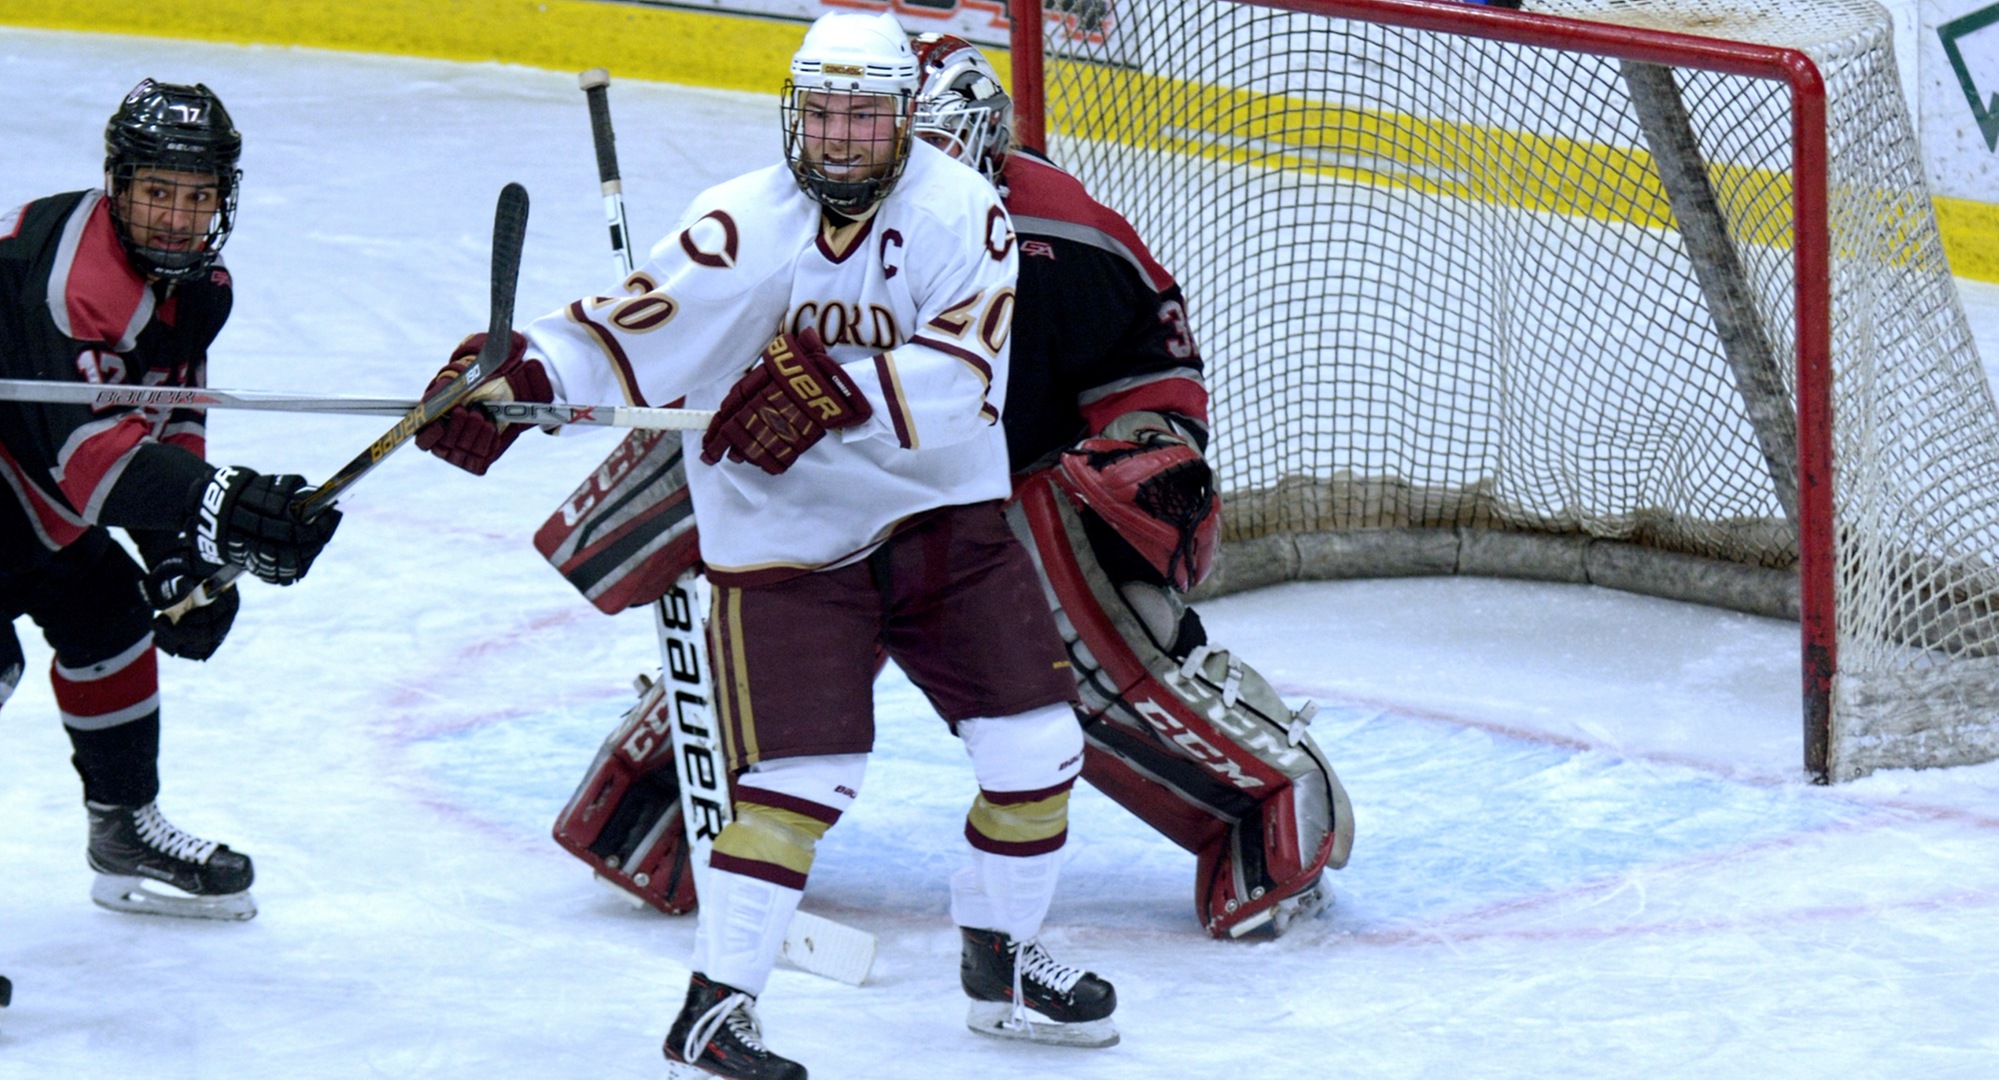 Senior captain Jeremy Johnson scored the Cobbers' lone goal in the MIAC semifinal game at St. Thomas.